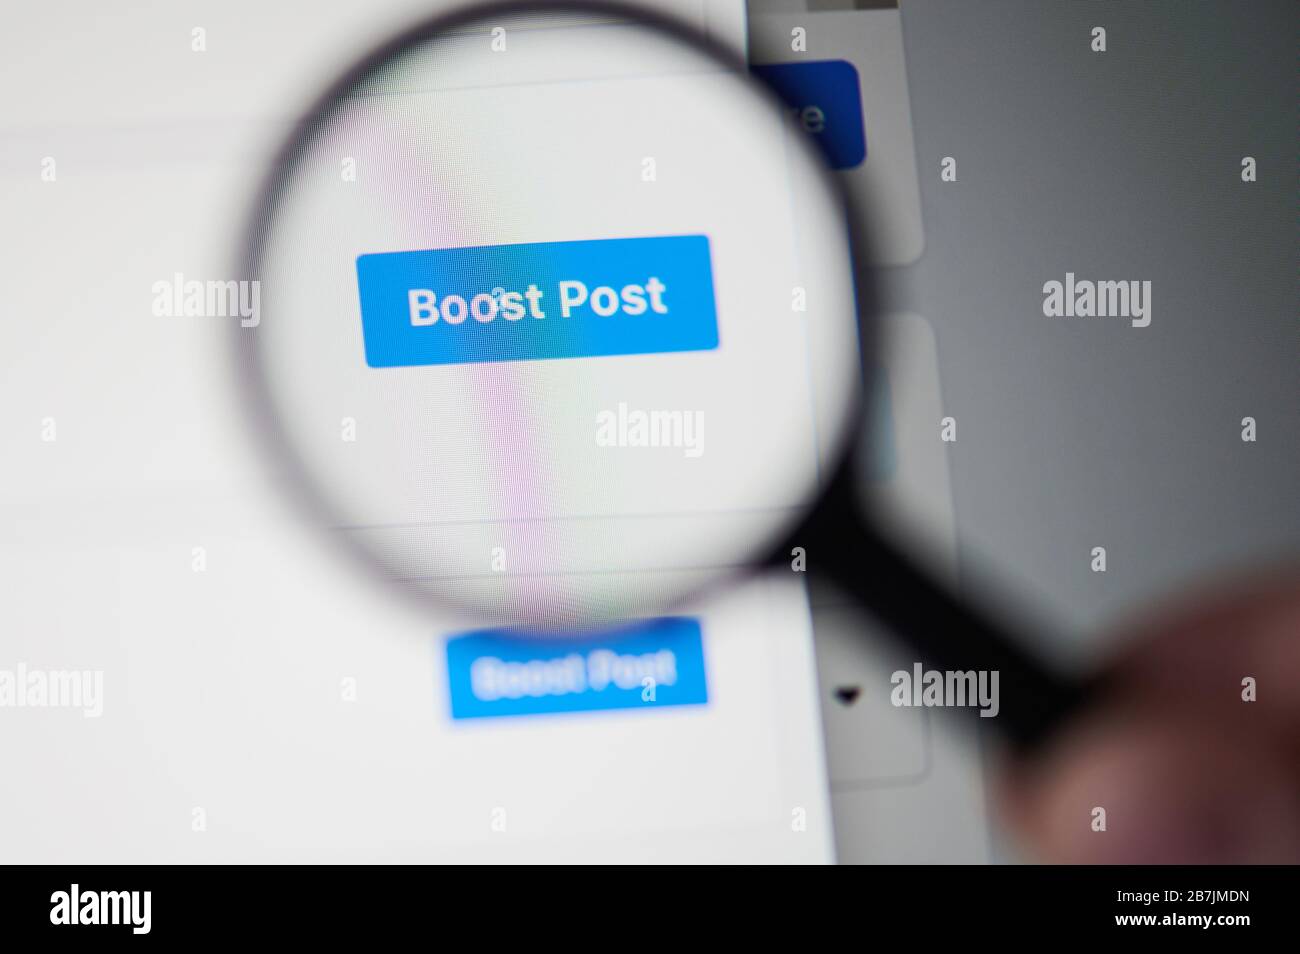 New-York , USA - March 13, 2020: Boost post on social media on laptop close up view throw magnifier Stock Photo